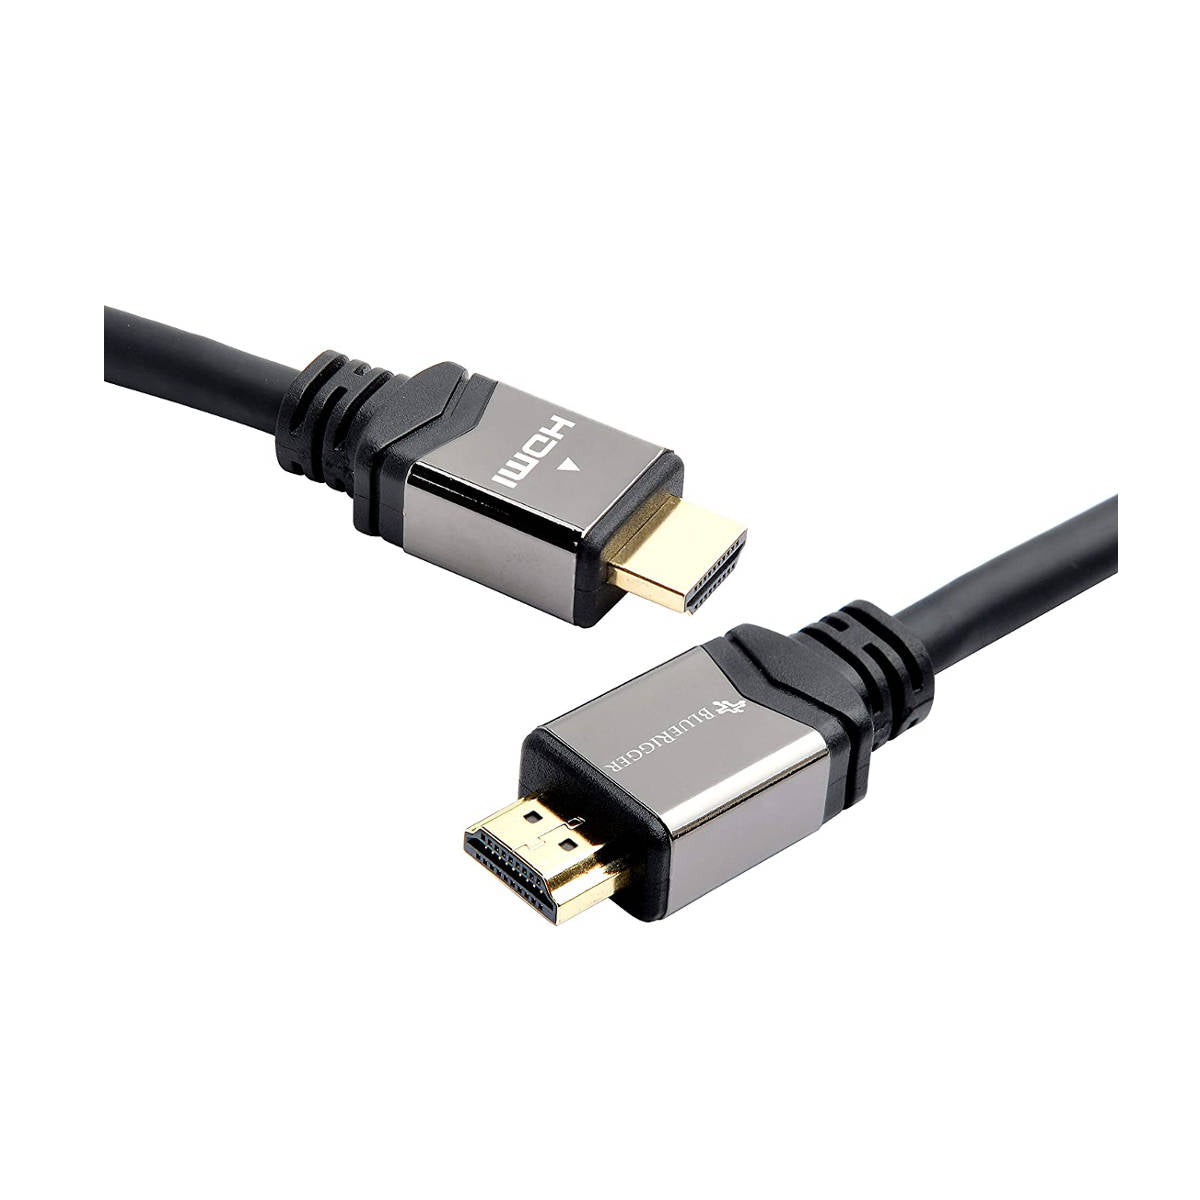 10ft 3m Premium HDMI 2.0 Cable 4K 60Hz - HDMI® Cables & HDMI Adapters